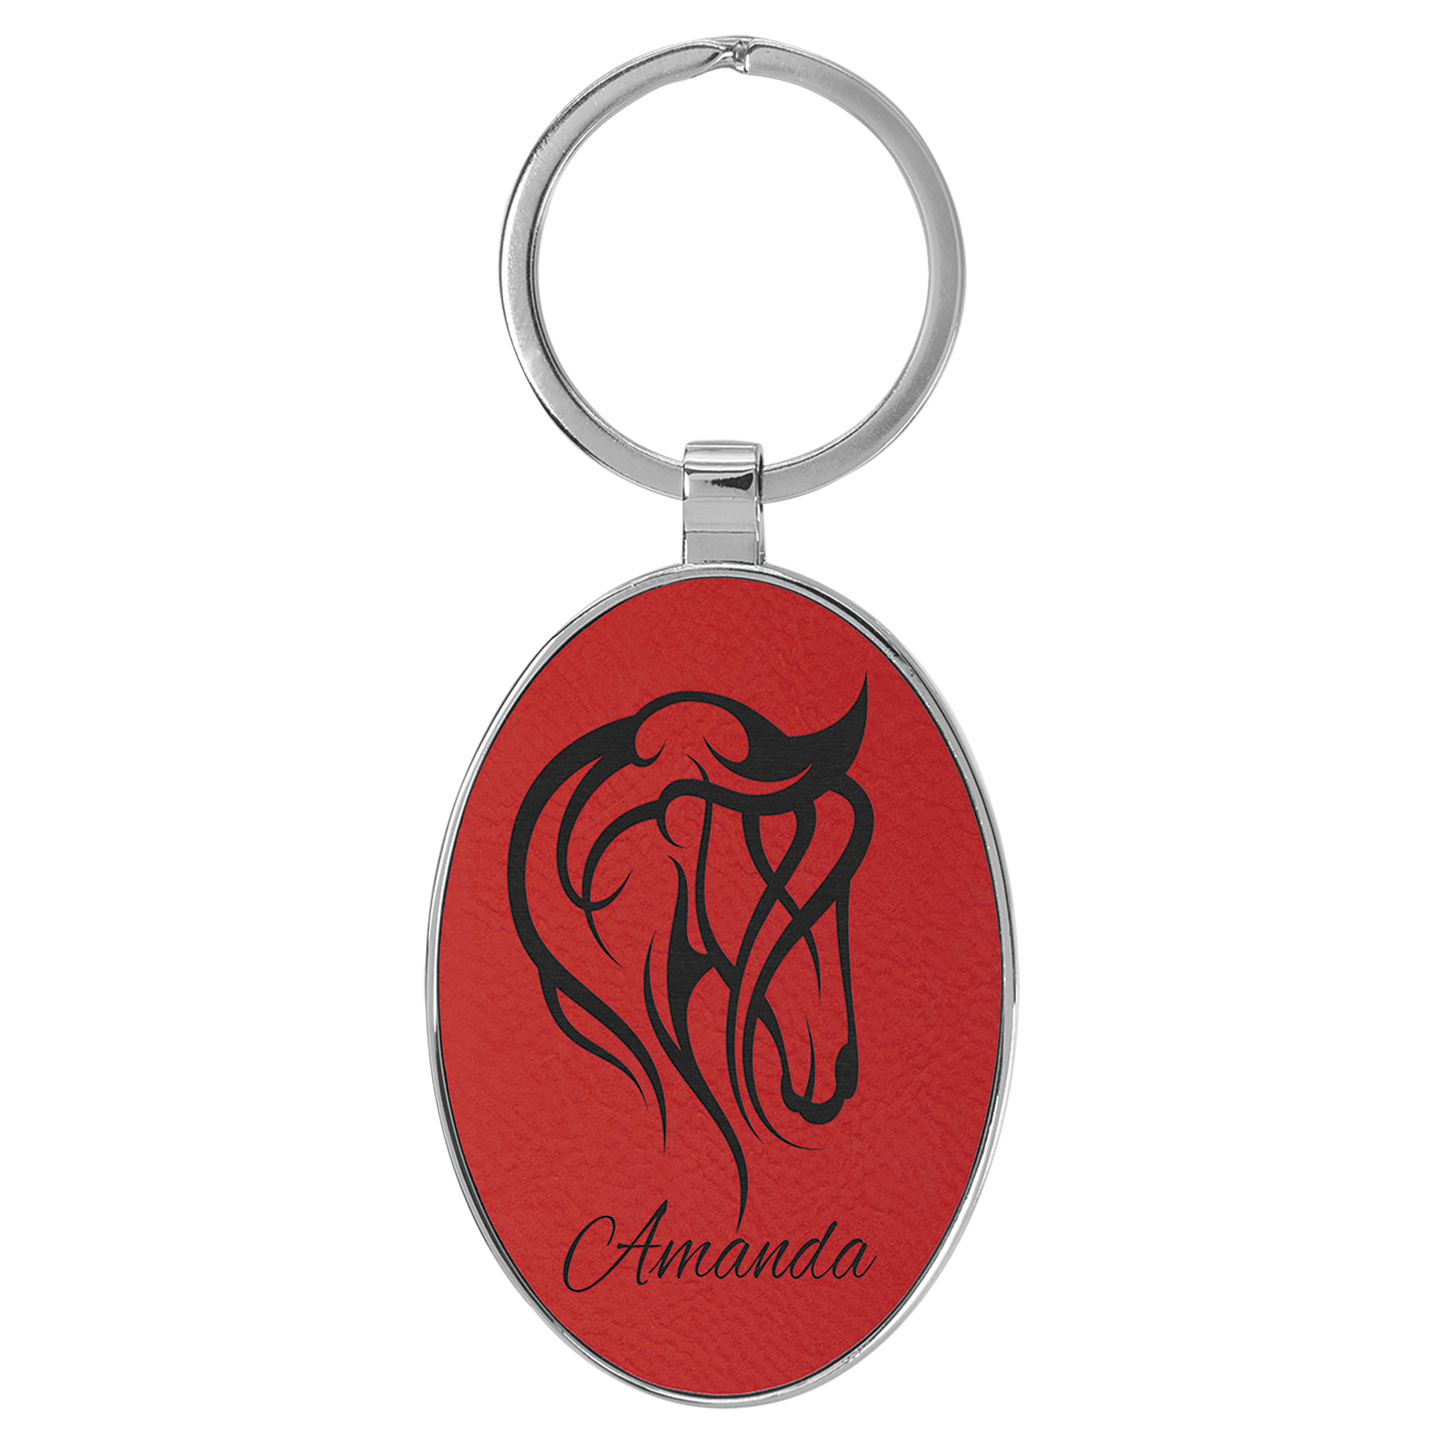 Personalized Oval Keychain with Metal Edge